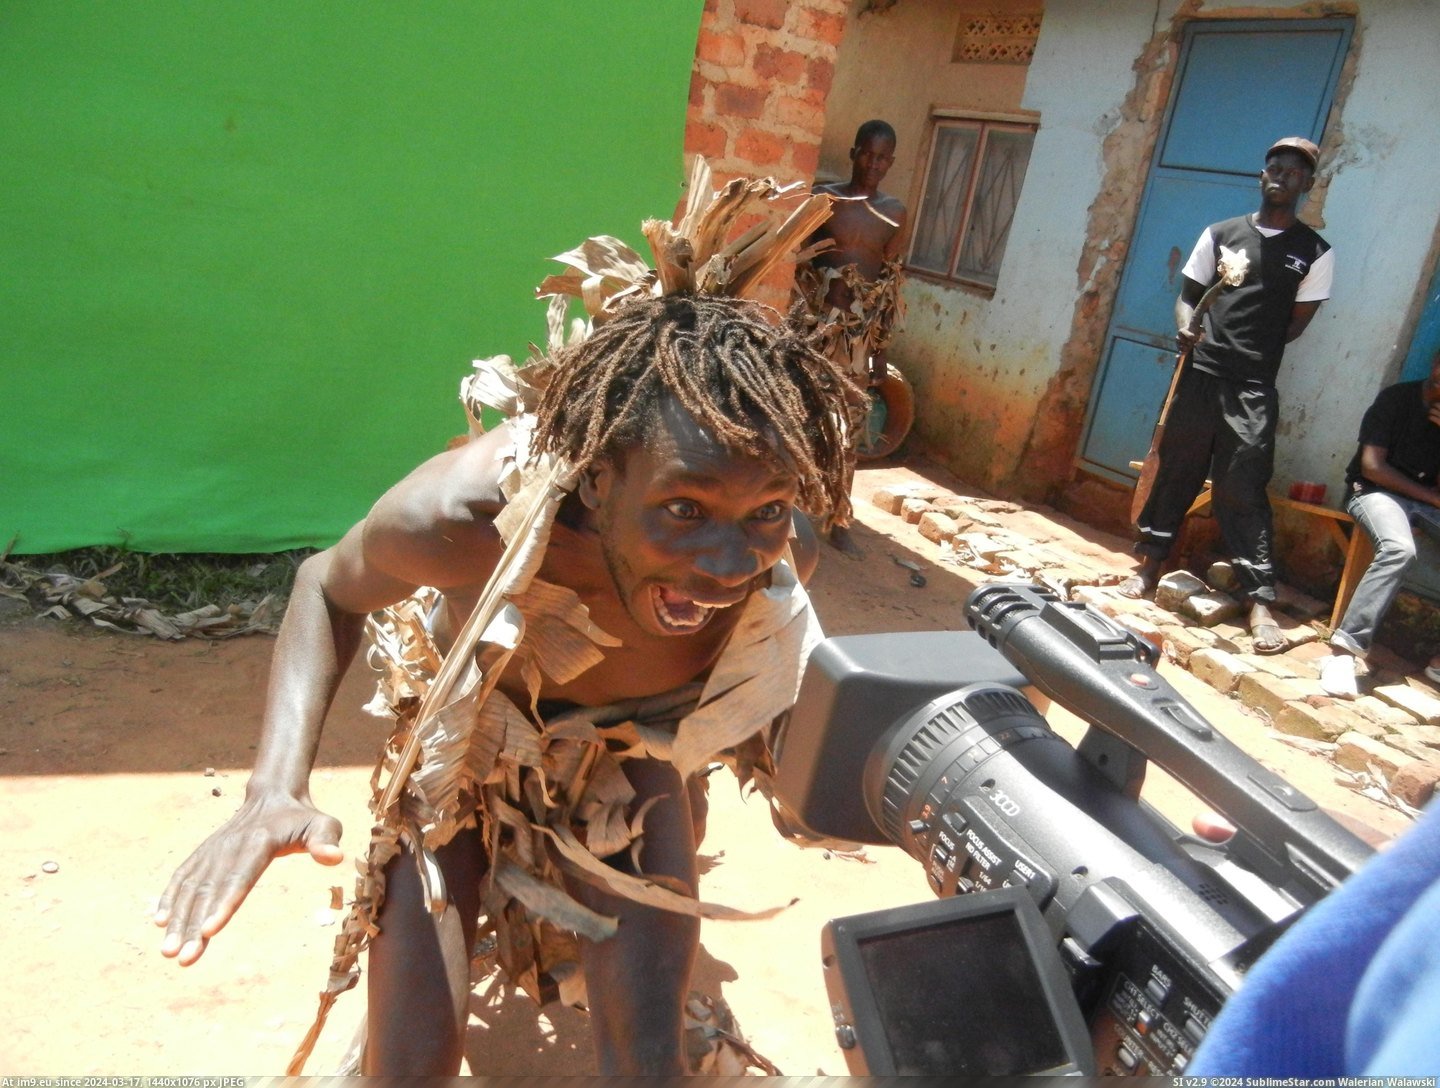 #Months #Living #Spent #Films #Slum #Wakaliwood #Africa #Nyc #Action [Pics] I'm from NYC and spent about 8 months living in a slum in Africa that makes action films (Wakaliwood). Somehow became a U Pic. (Image of album My r/PICS favs))